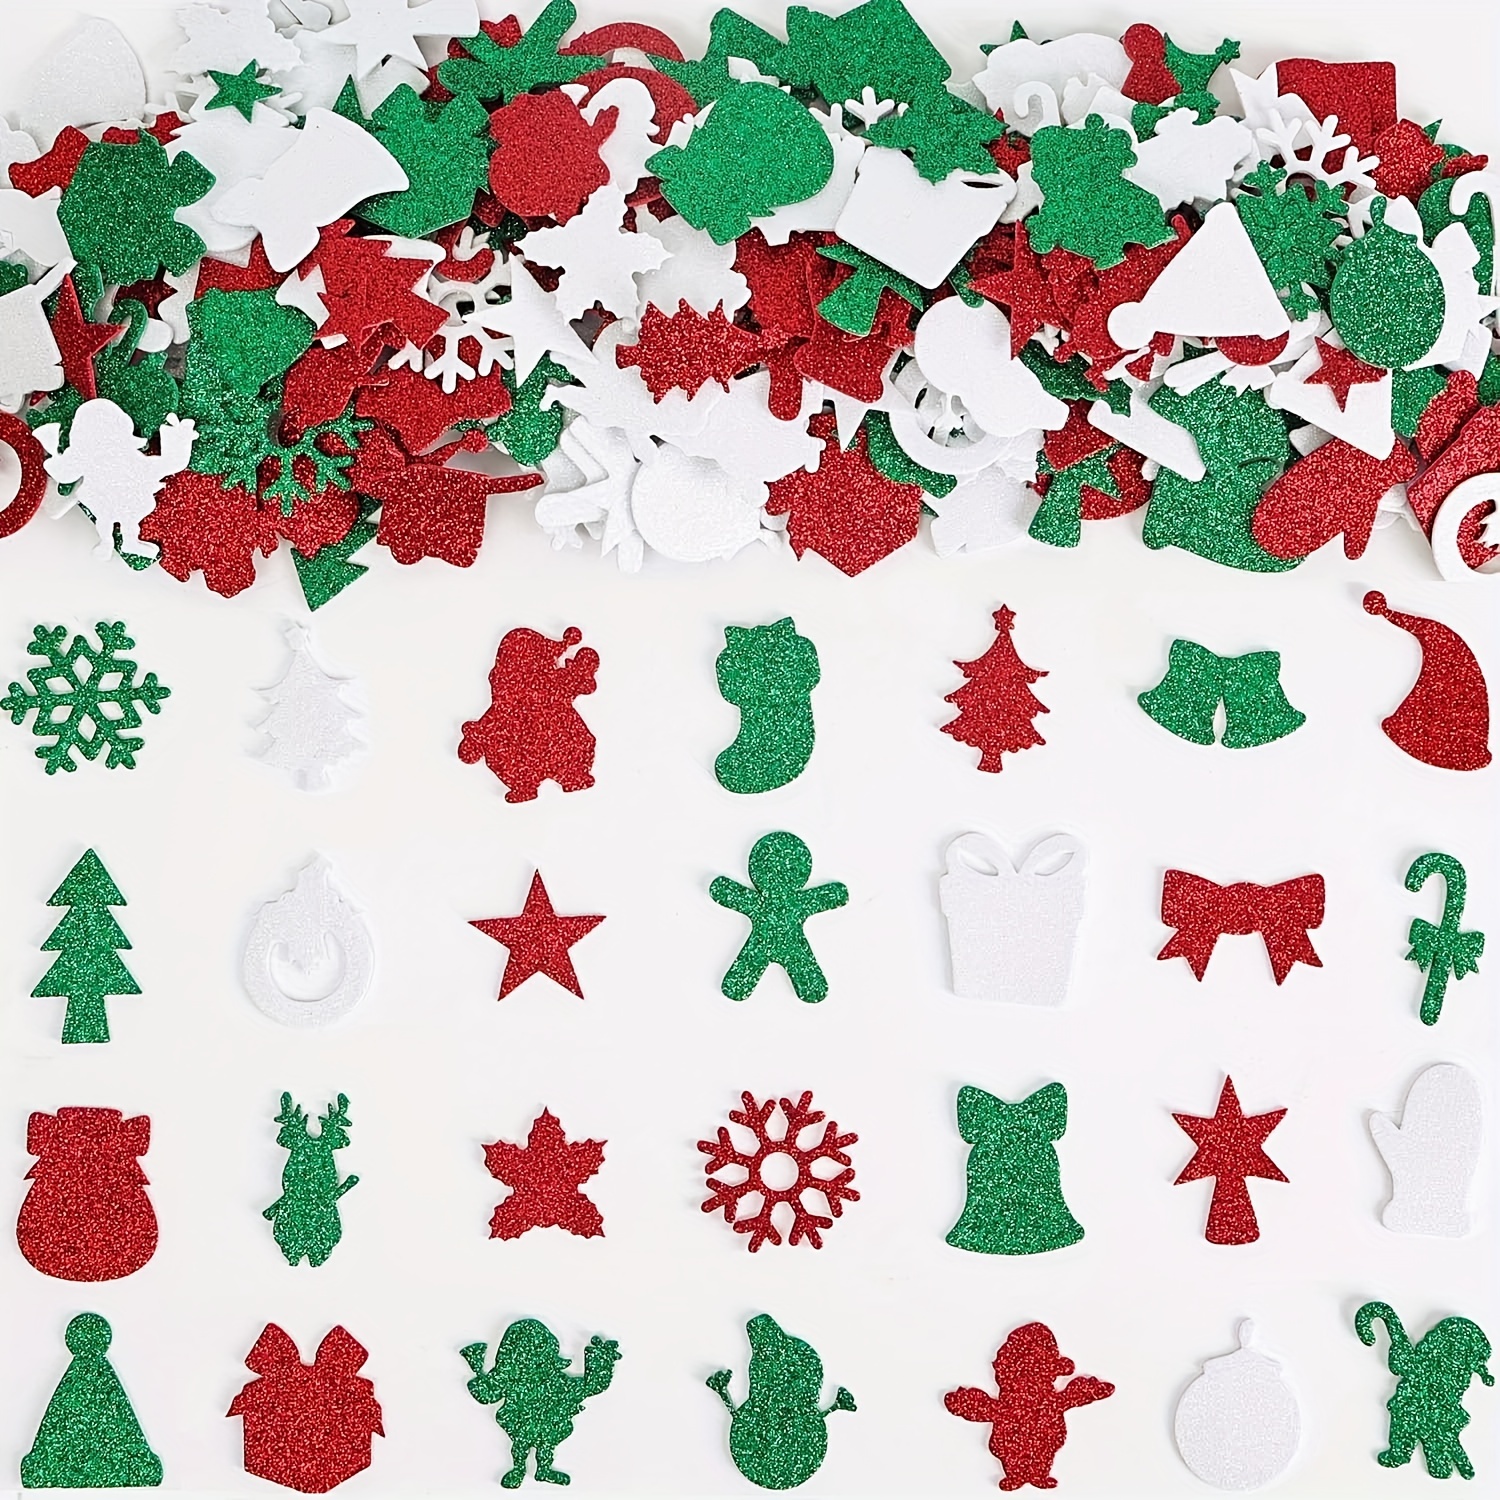 KESOTE Glitter Christmas Stickers for Crafts, 5 Sheets Self-Adhesive  Holiday Star Snowflake Stickers for Crafts Envelopes Cards Making Gifts  Christmas